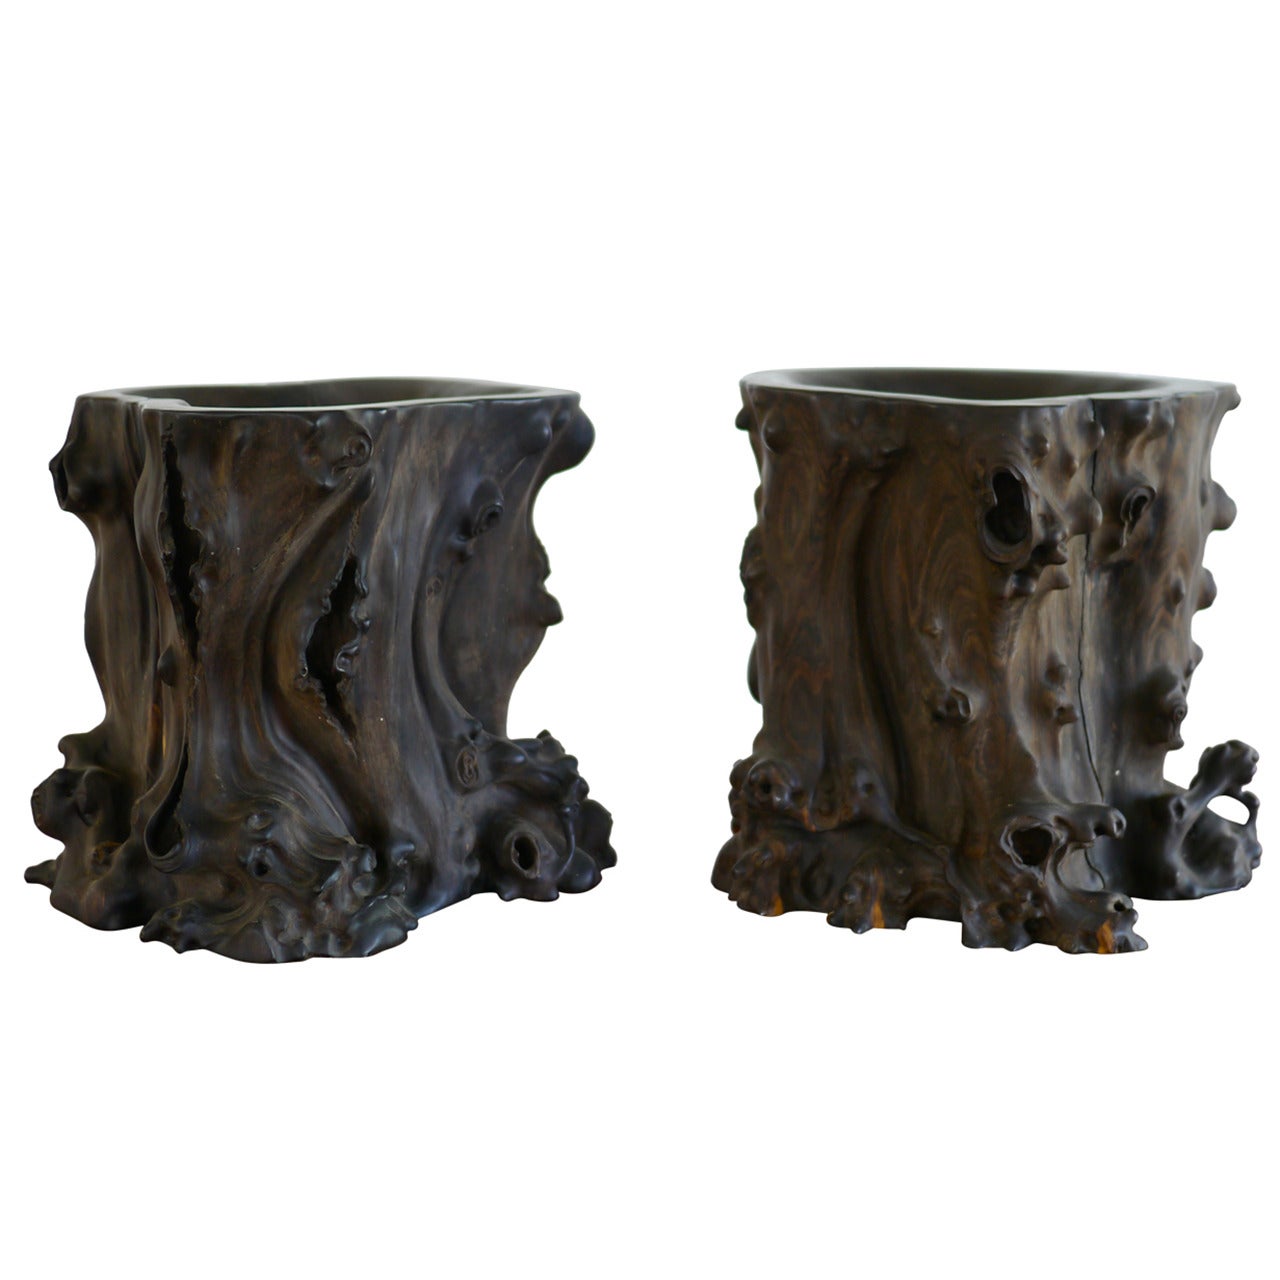 Pair of Exceptional Chinese Zitan Root Scholar's Brush Pots